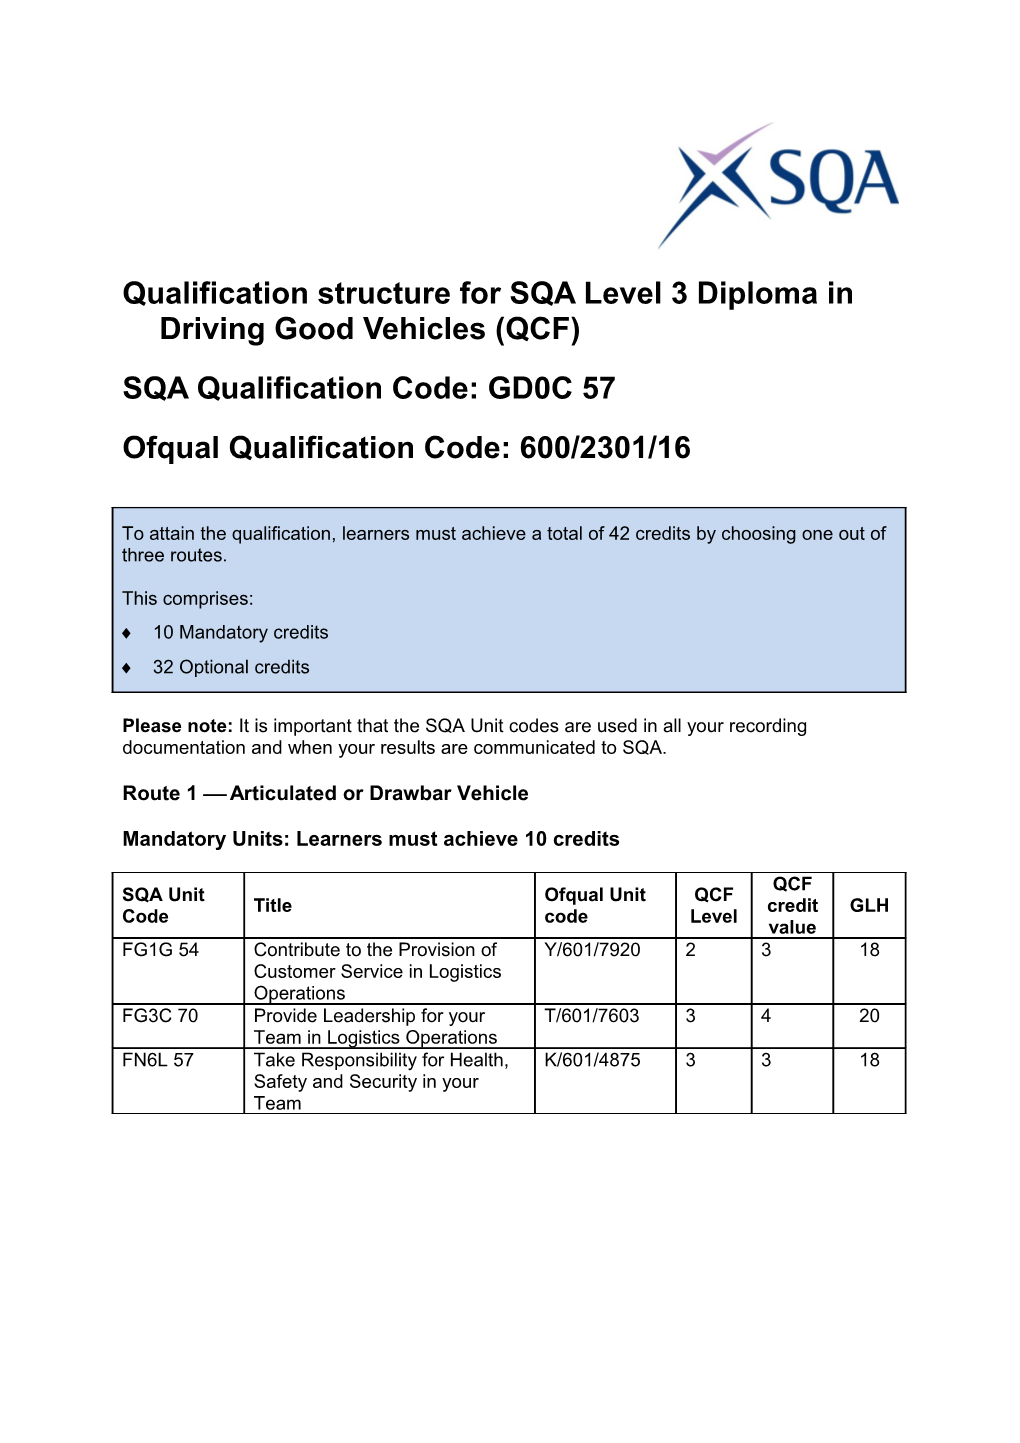 Qualification Structure for SQA Level 3 Diploma Indriving Good Vehicles(QCF)